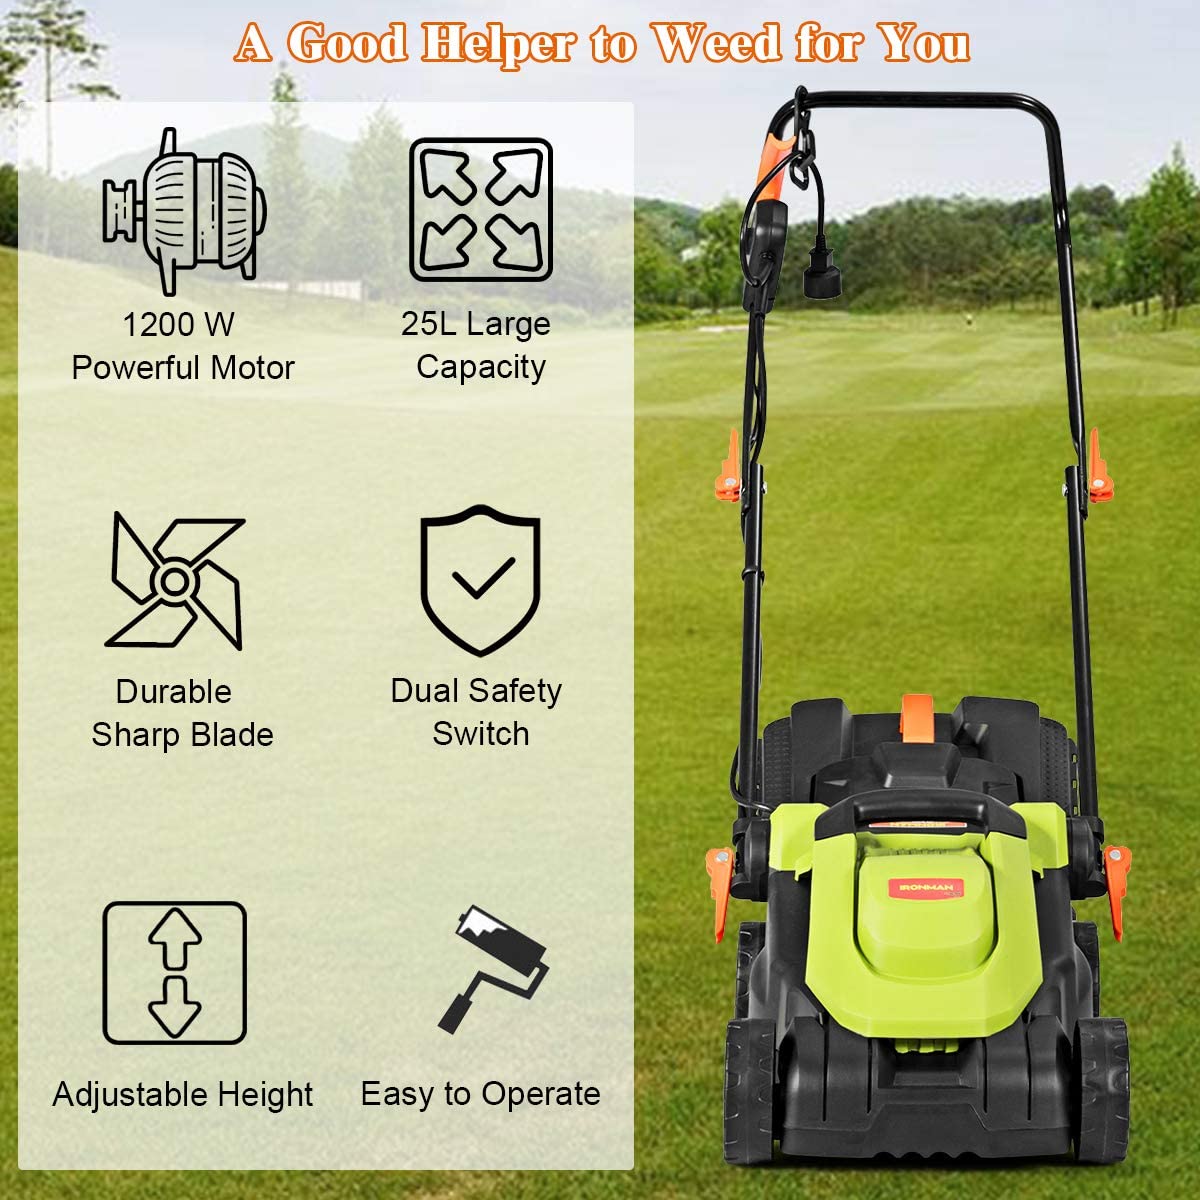 14'' 12 Amp Electric Lawn Mower Corded Grass Cutting Machine with Folding Handle & Detachable Grass Collection Bag